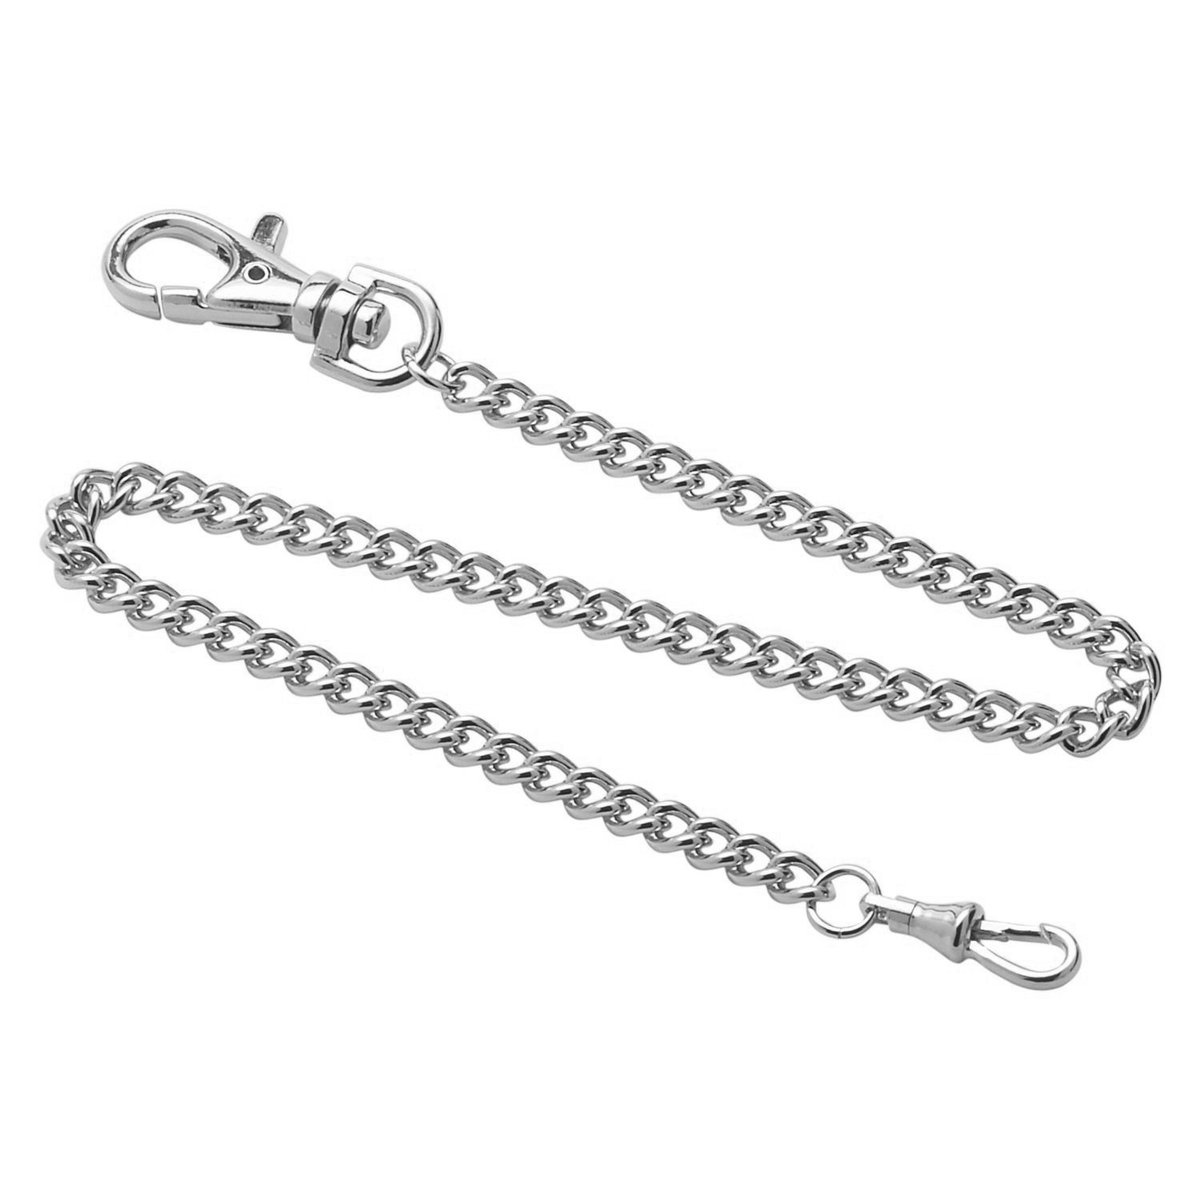 Premium Coat Chain, Pocket Chain For Women's And Men's Stainless